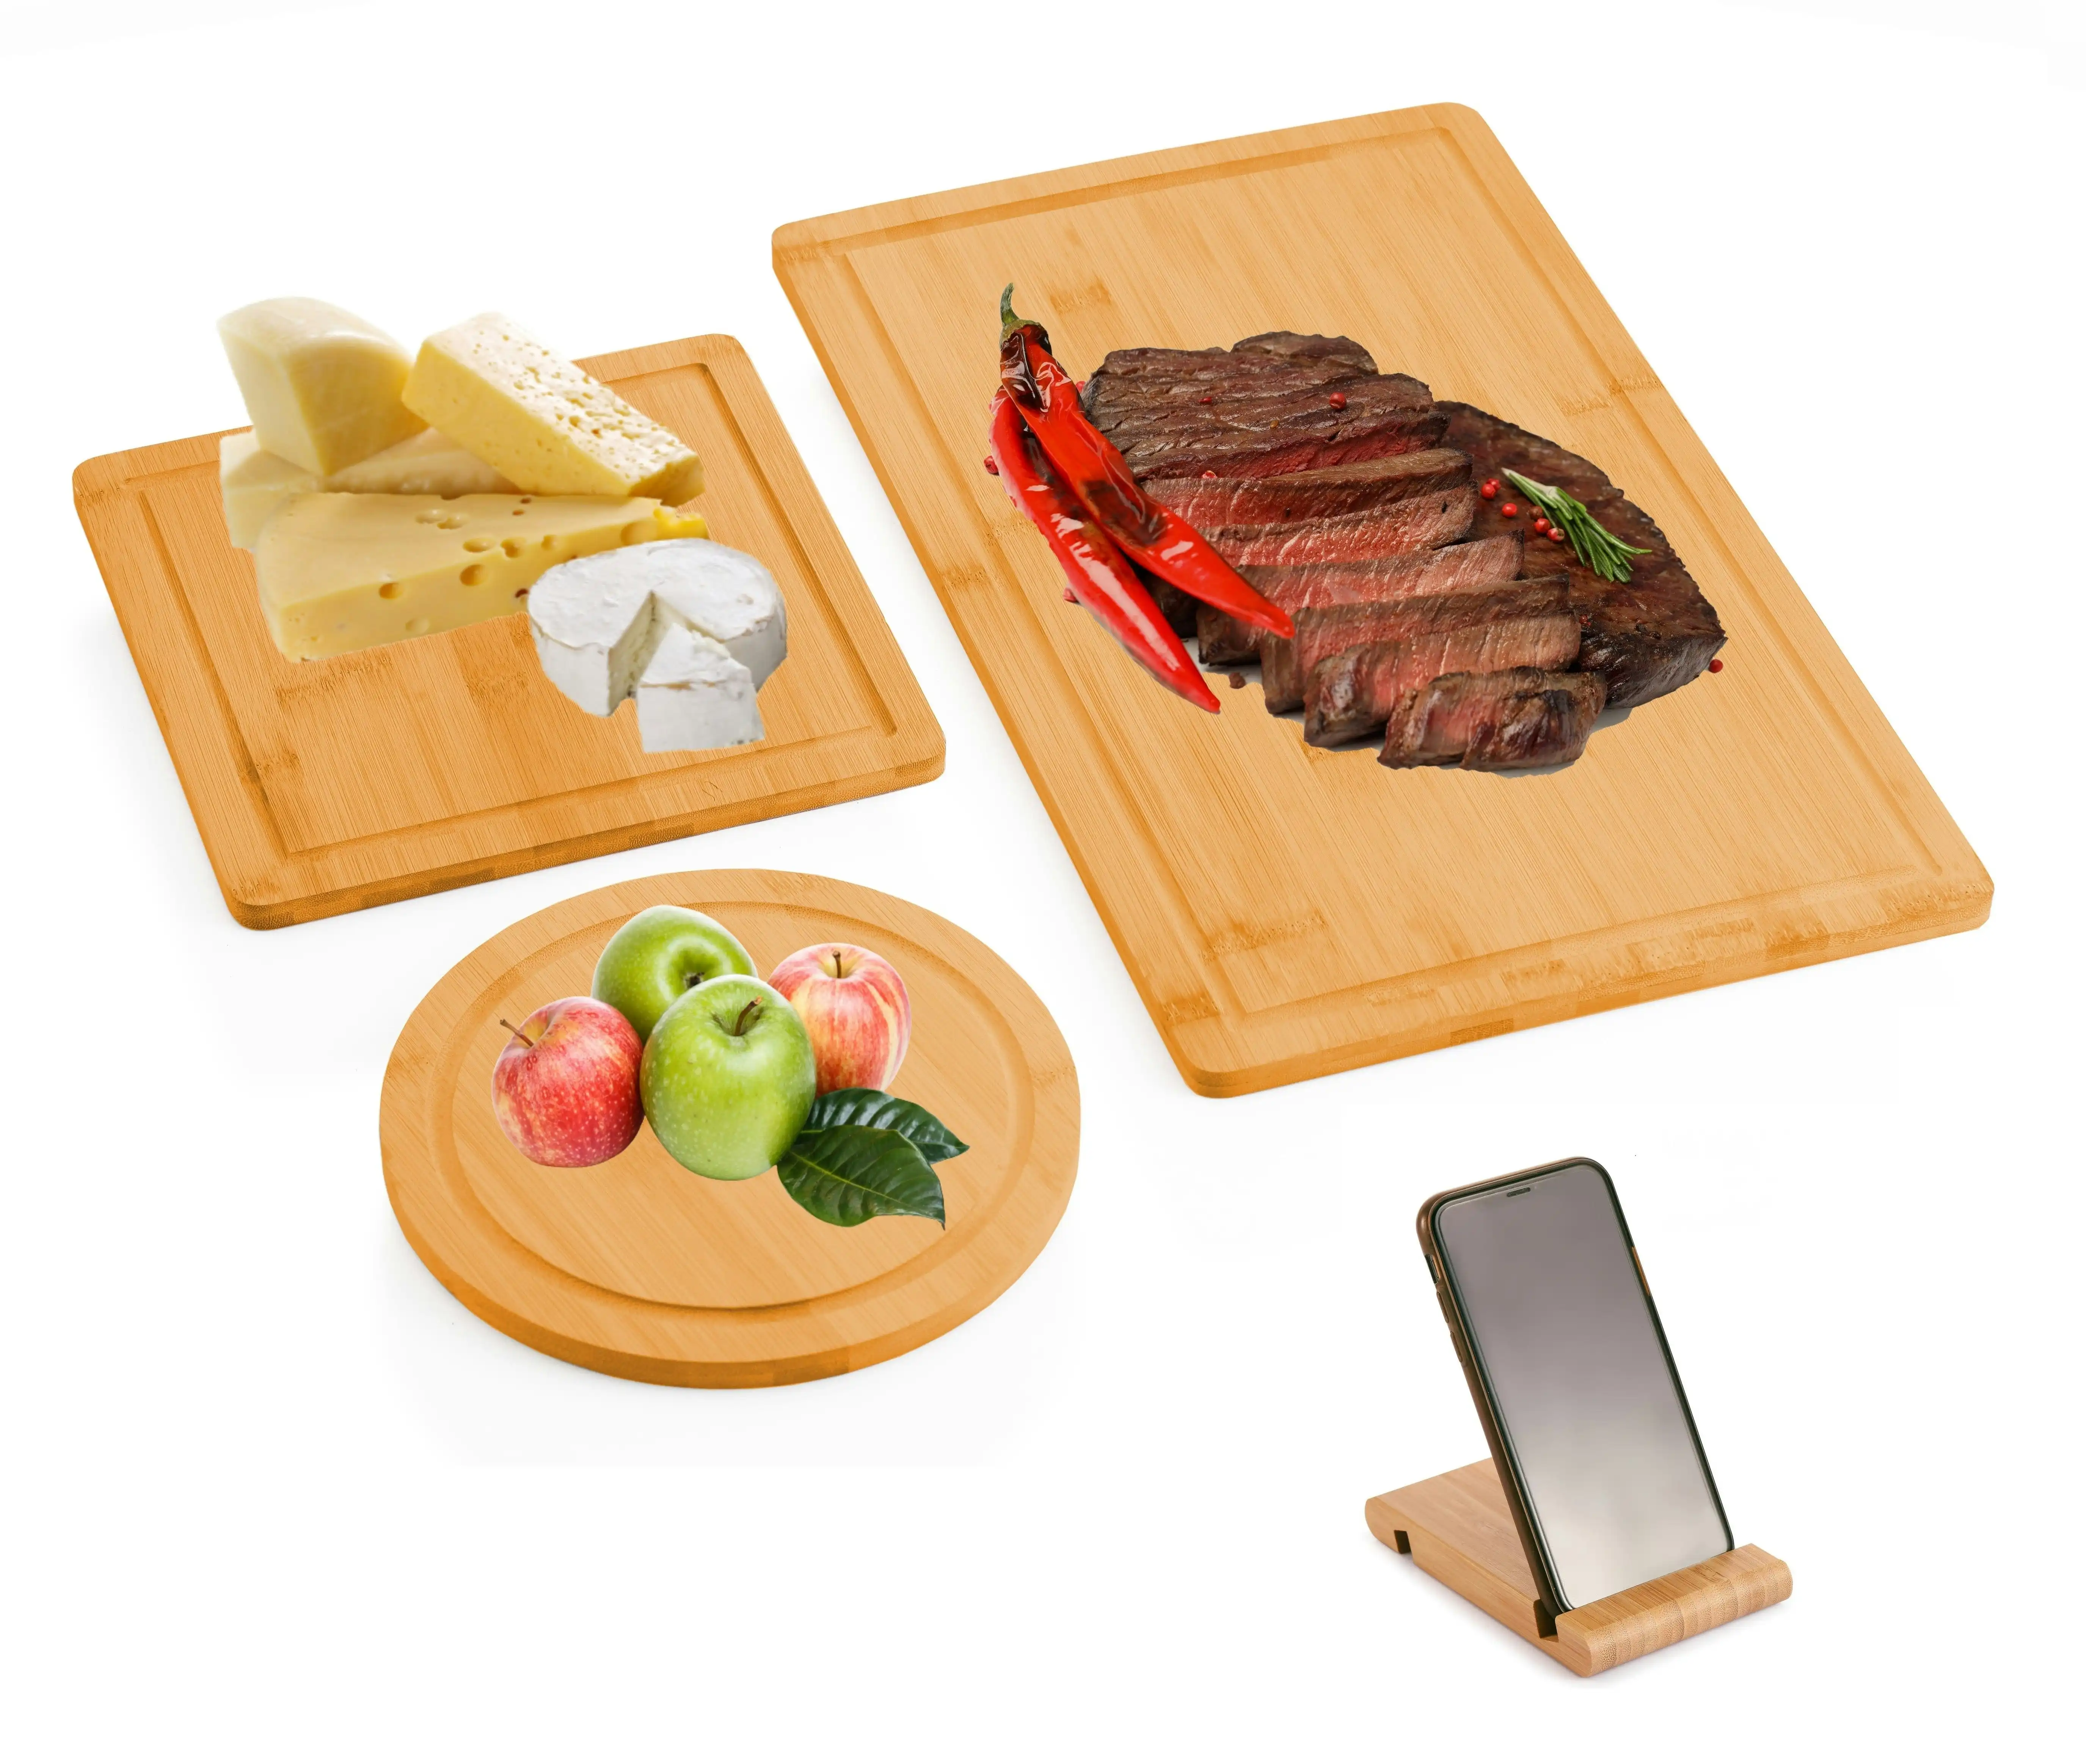 Carla Home 3 Pieces Bamboo Cutting Board with Juice Groove and Mobile Holder included for Home Kitchen